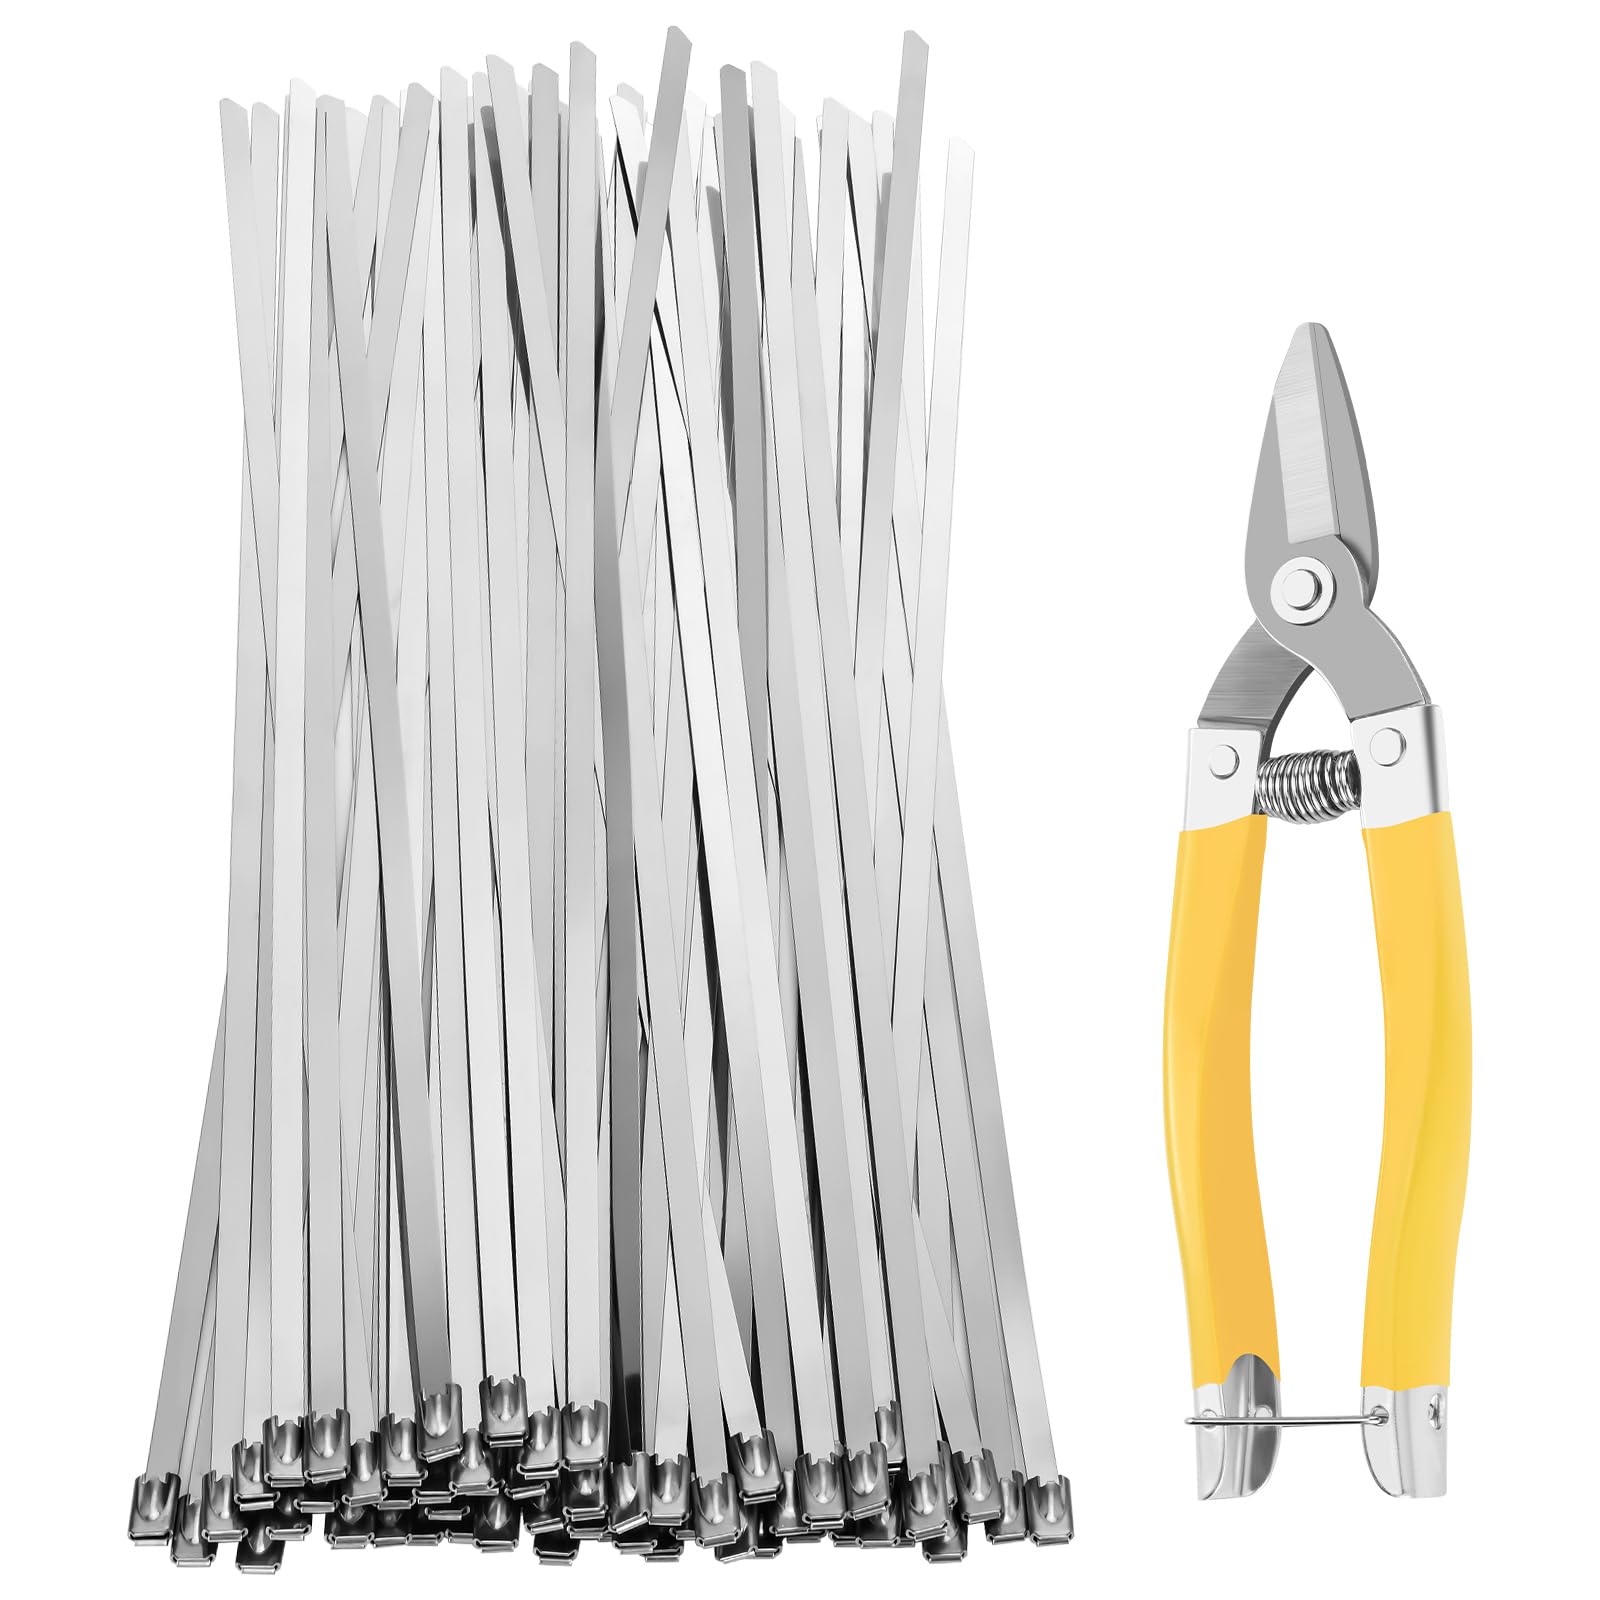 Metal Zip Ties Heavy Duty with Cutter 100pcs 11.8 inch 304 Stainless Steel Zip Ties Self-Locking Cable Ties 200LB Tensile Strength for Machinery, Vehicles, Pipesas, Chain Link Fences etc.